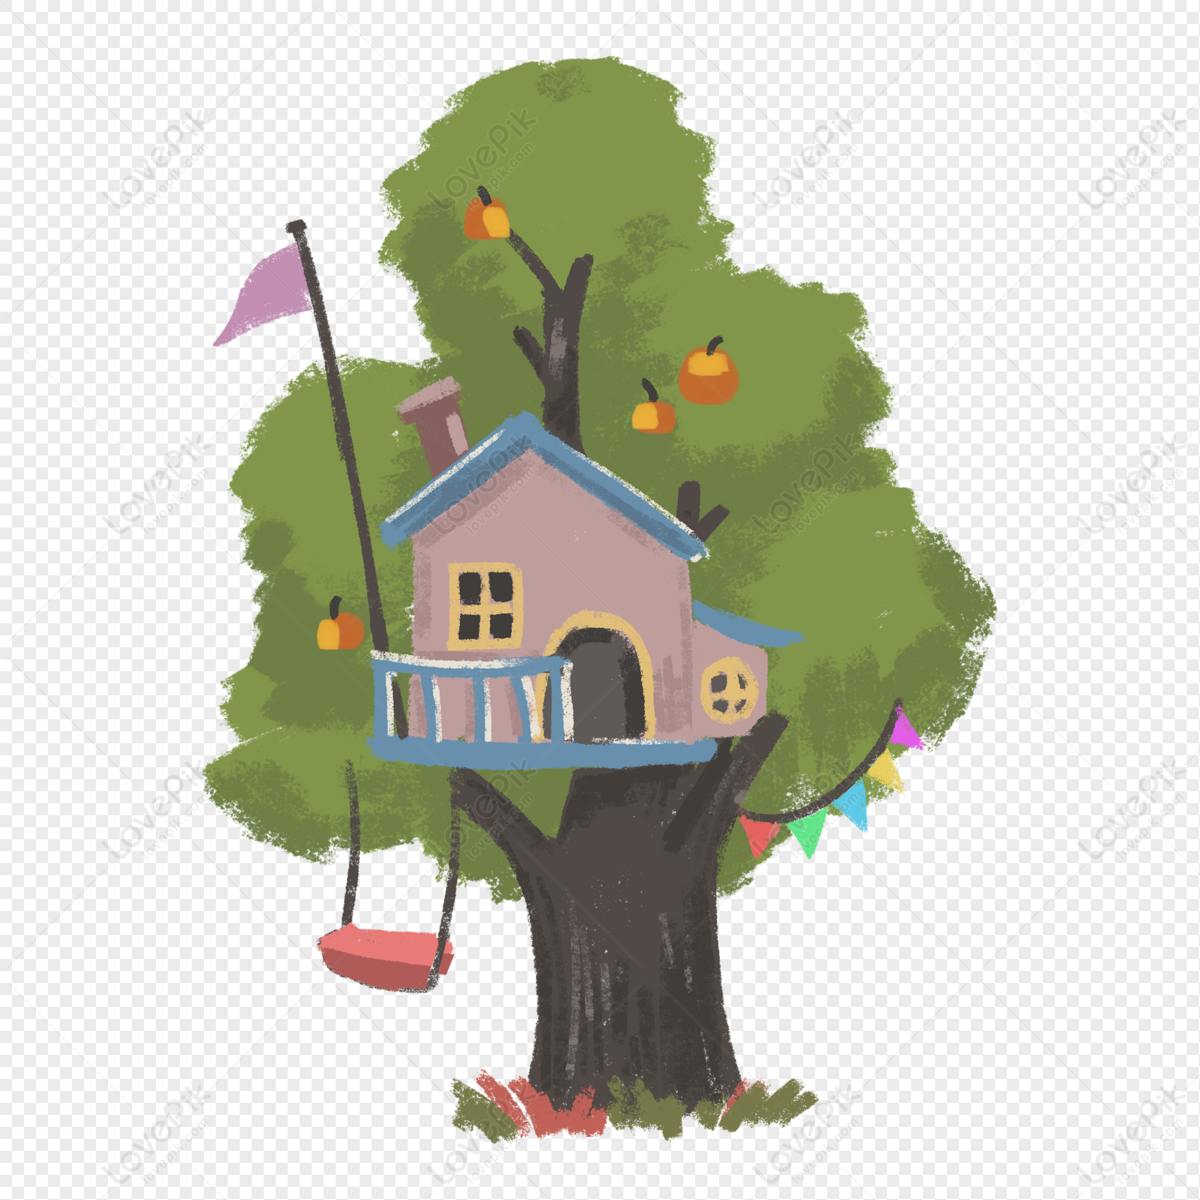 Tree House On Cartoon Fruit Tree Free PNG And Clipart Image For Free  Download - Lovepik | 401549679